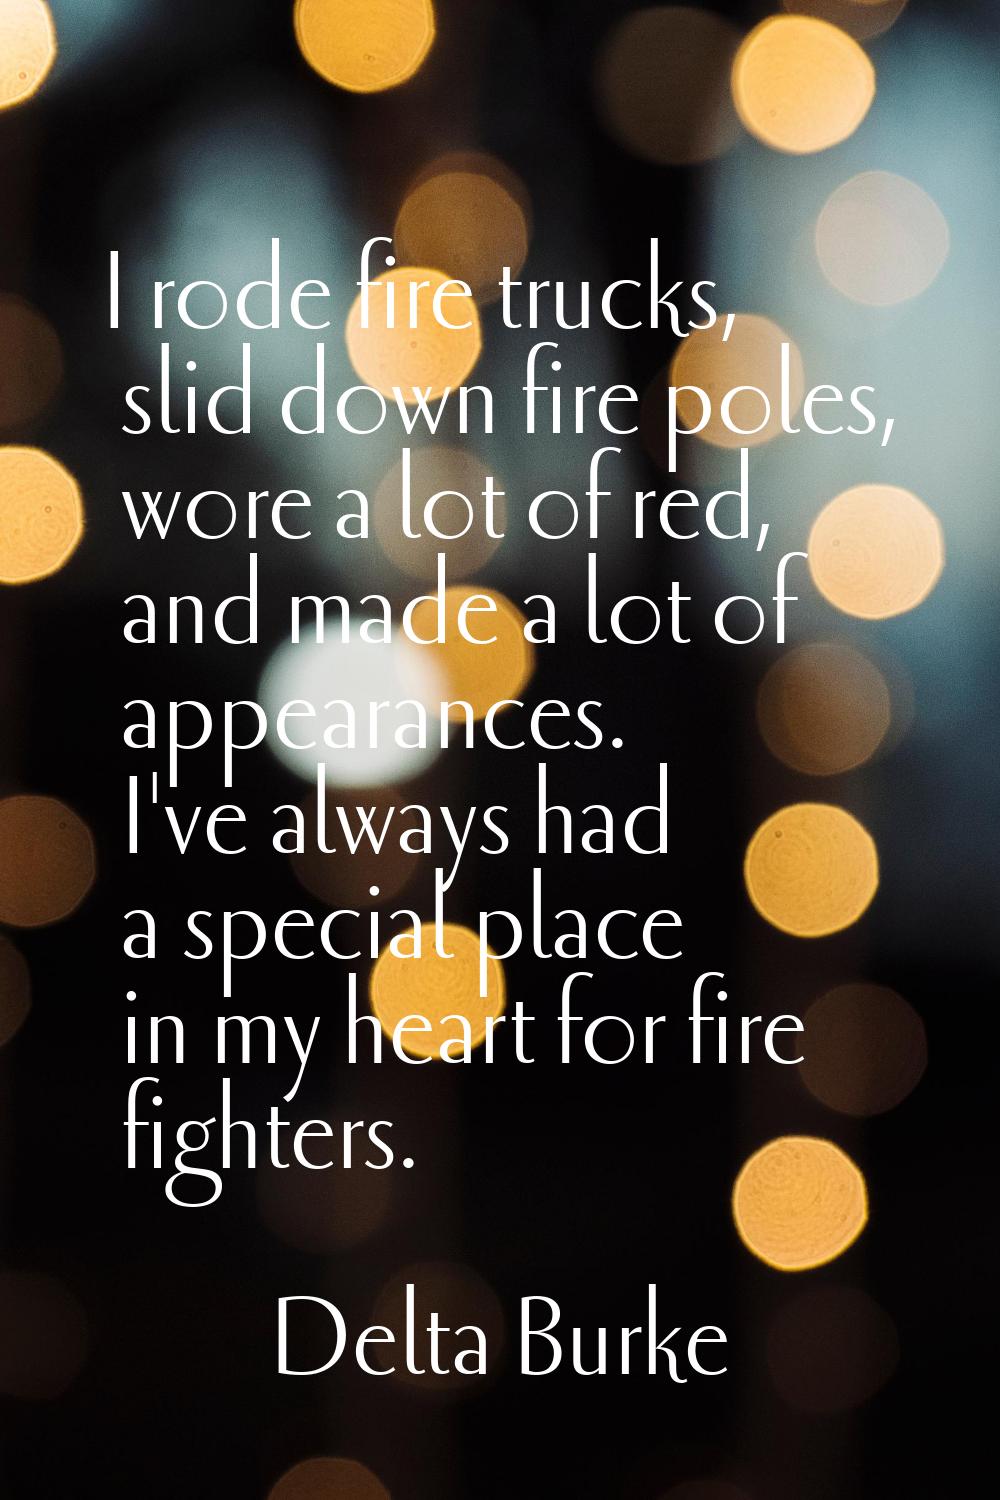 I rode fire trucks, slid down fire poles, wore a lot of red, and made a lot of appearances. I've al